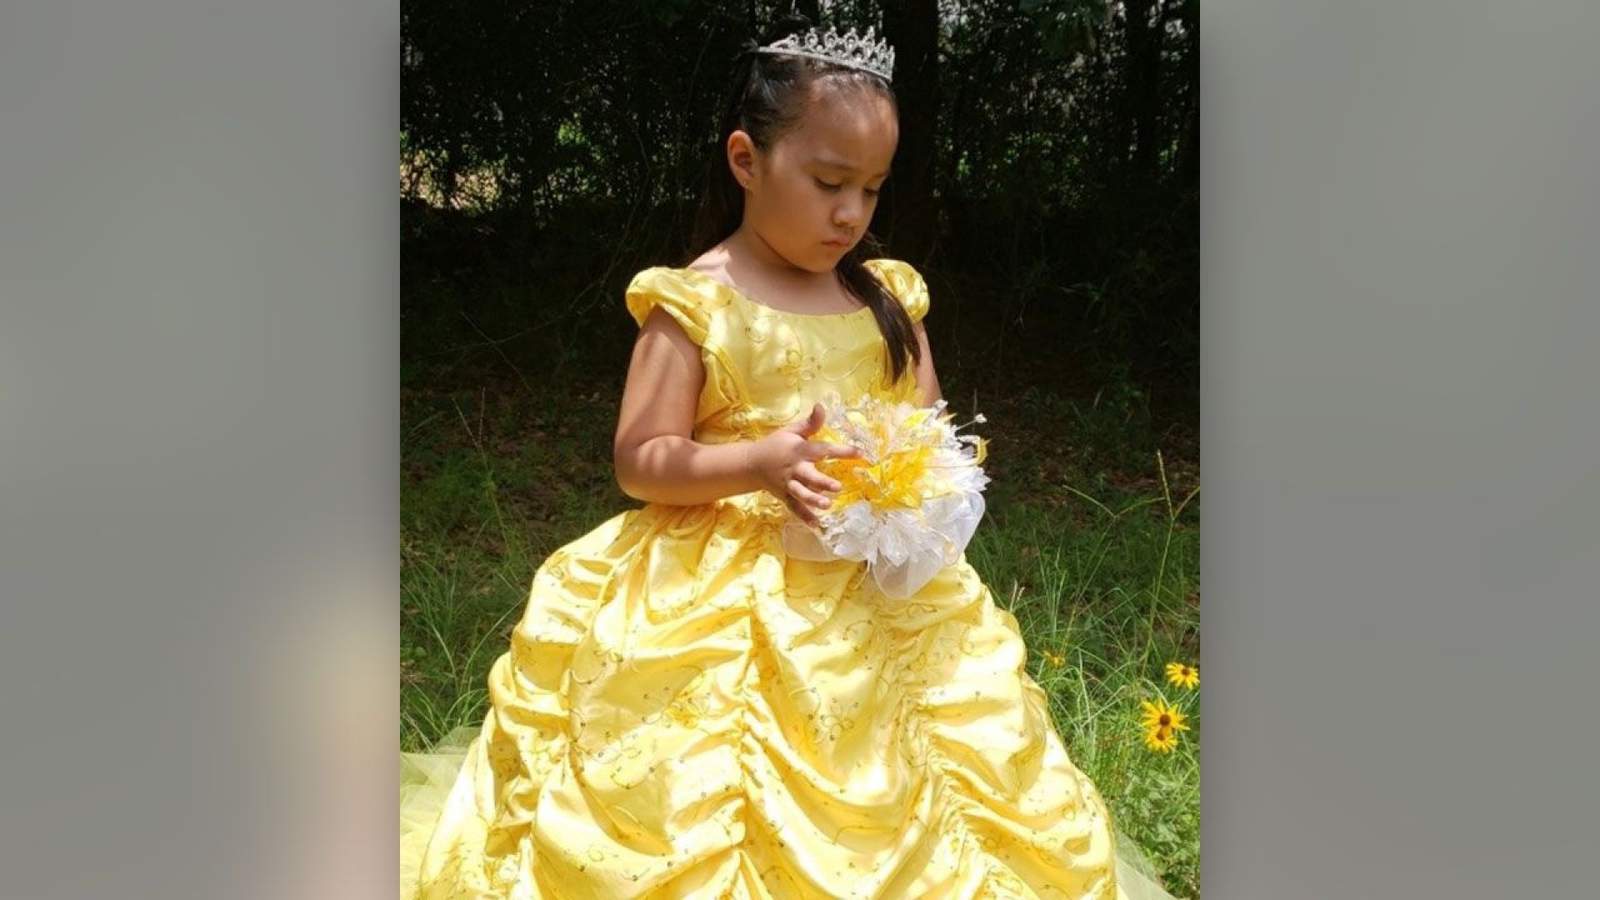 6-year-old Conroe girl dies after she was run over by school bus, police say